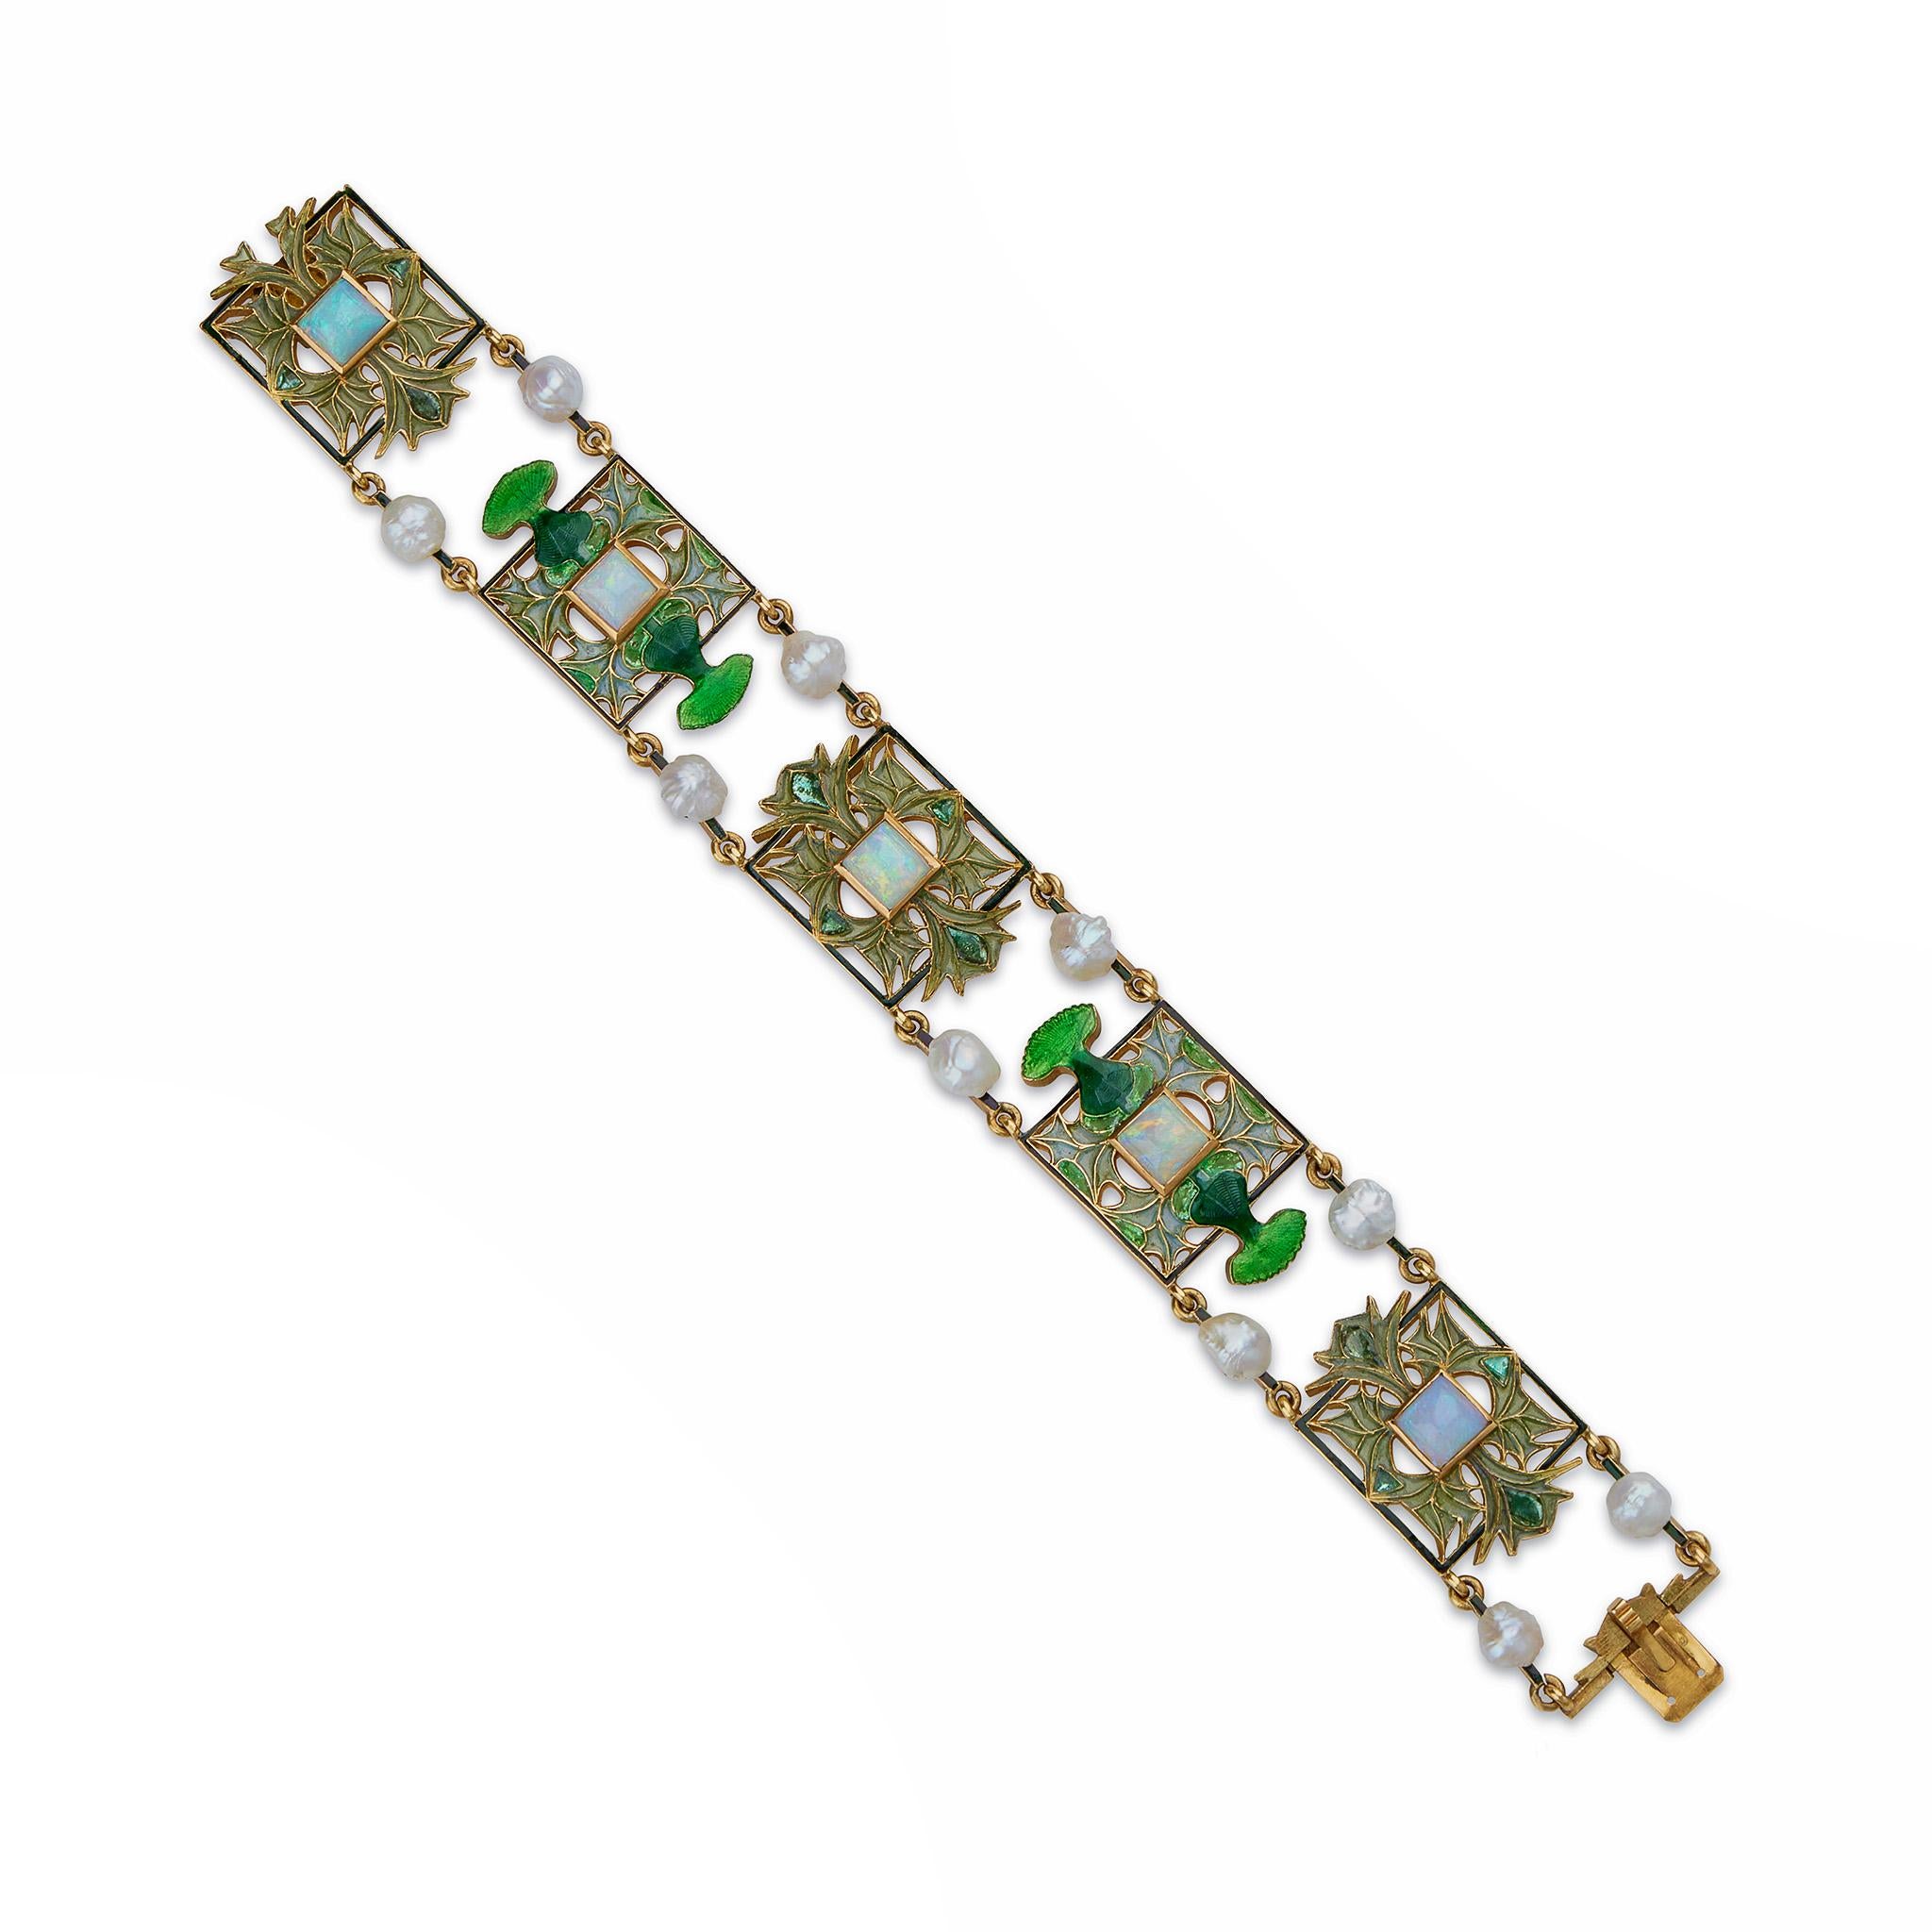 Created by René Lalique around 1901-1903, this plique-à-jour and basse-taille enamel, opal and freshwater pearl thistle of Lorraine bracelet is set in chased 18K gold. The bracelet is composed of rectangular links centering sugarloaf opals framed by